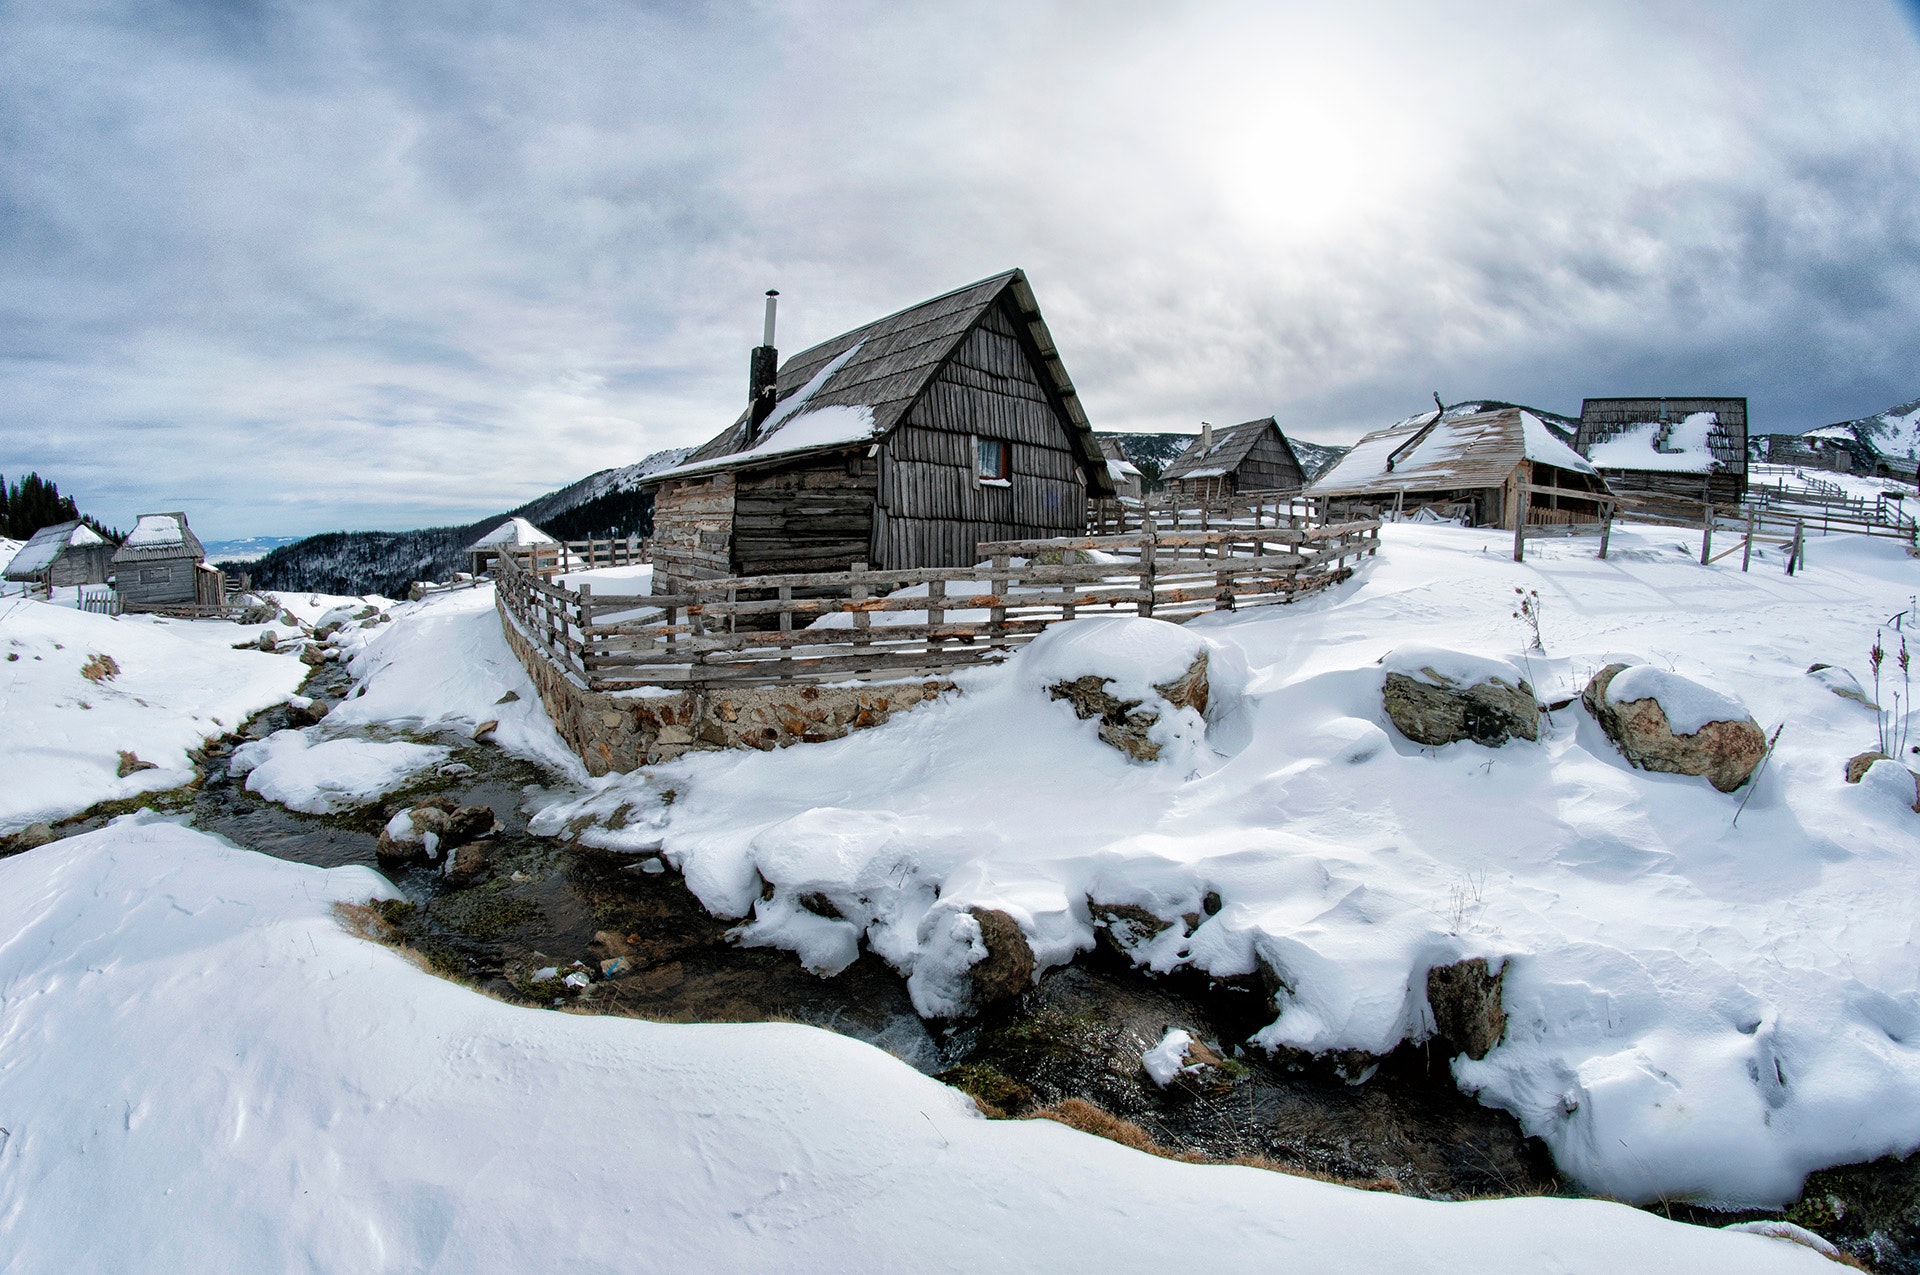 Black wooden house surrounded by snow under white clouds photo